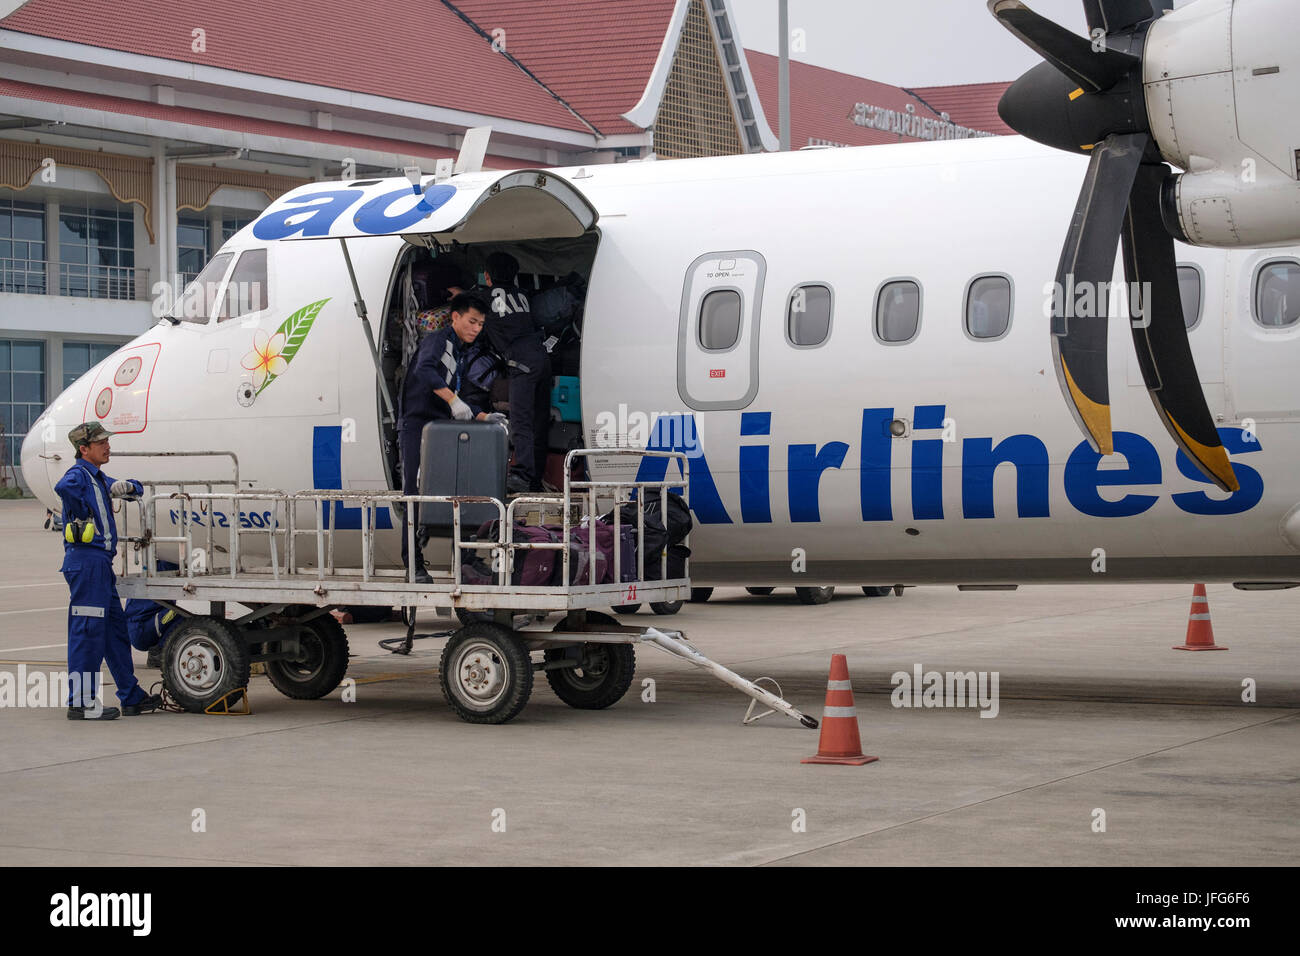 Bag handlers loading luggage into Lao Airlines airplane at airport tarmac Stock Photo